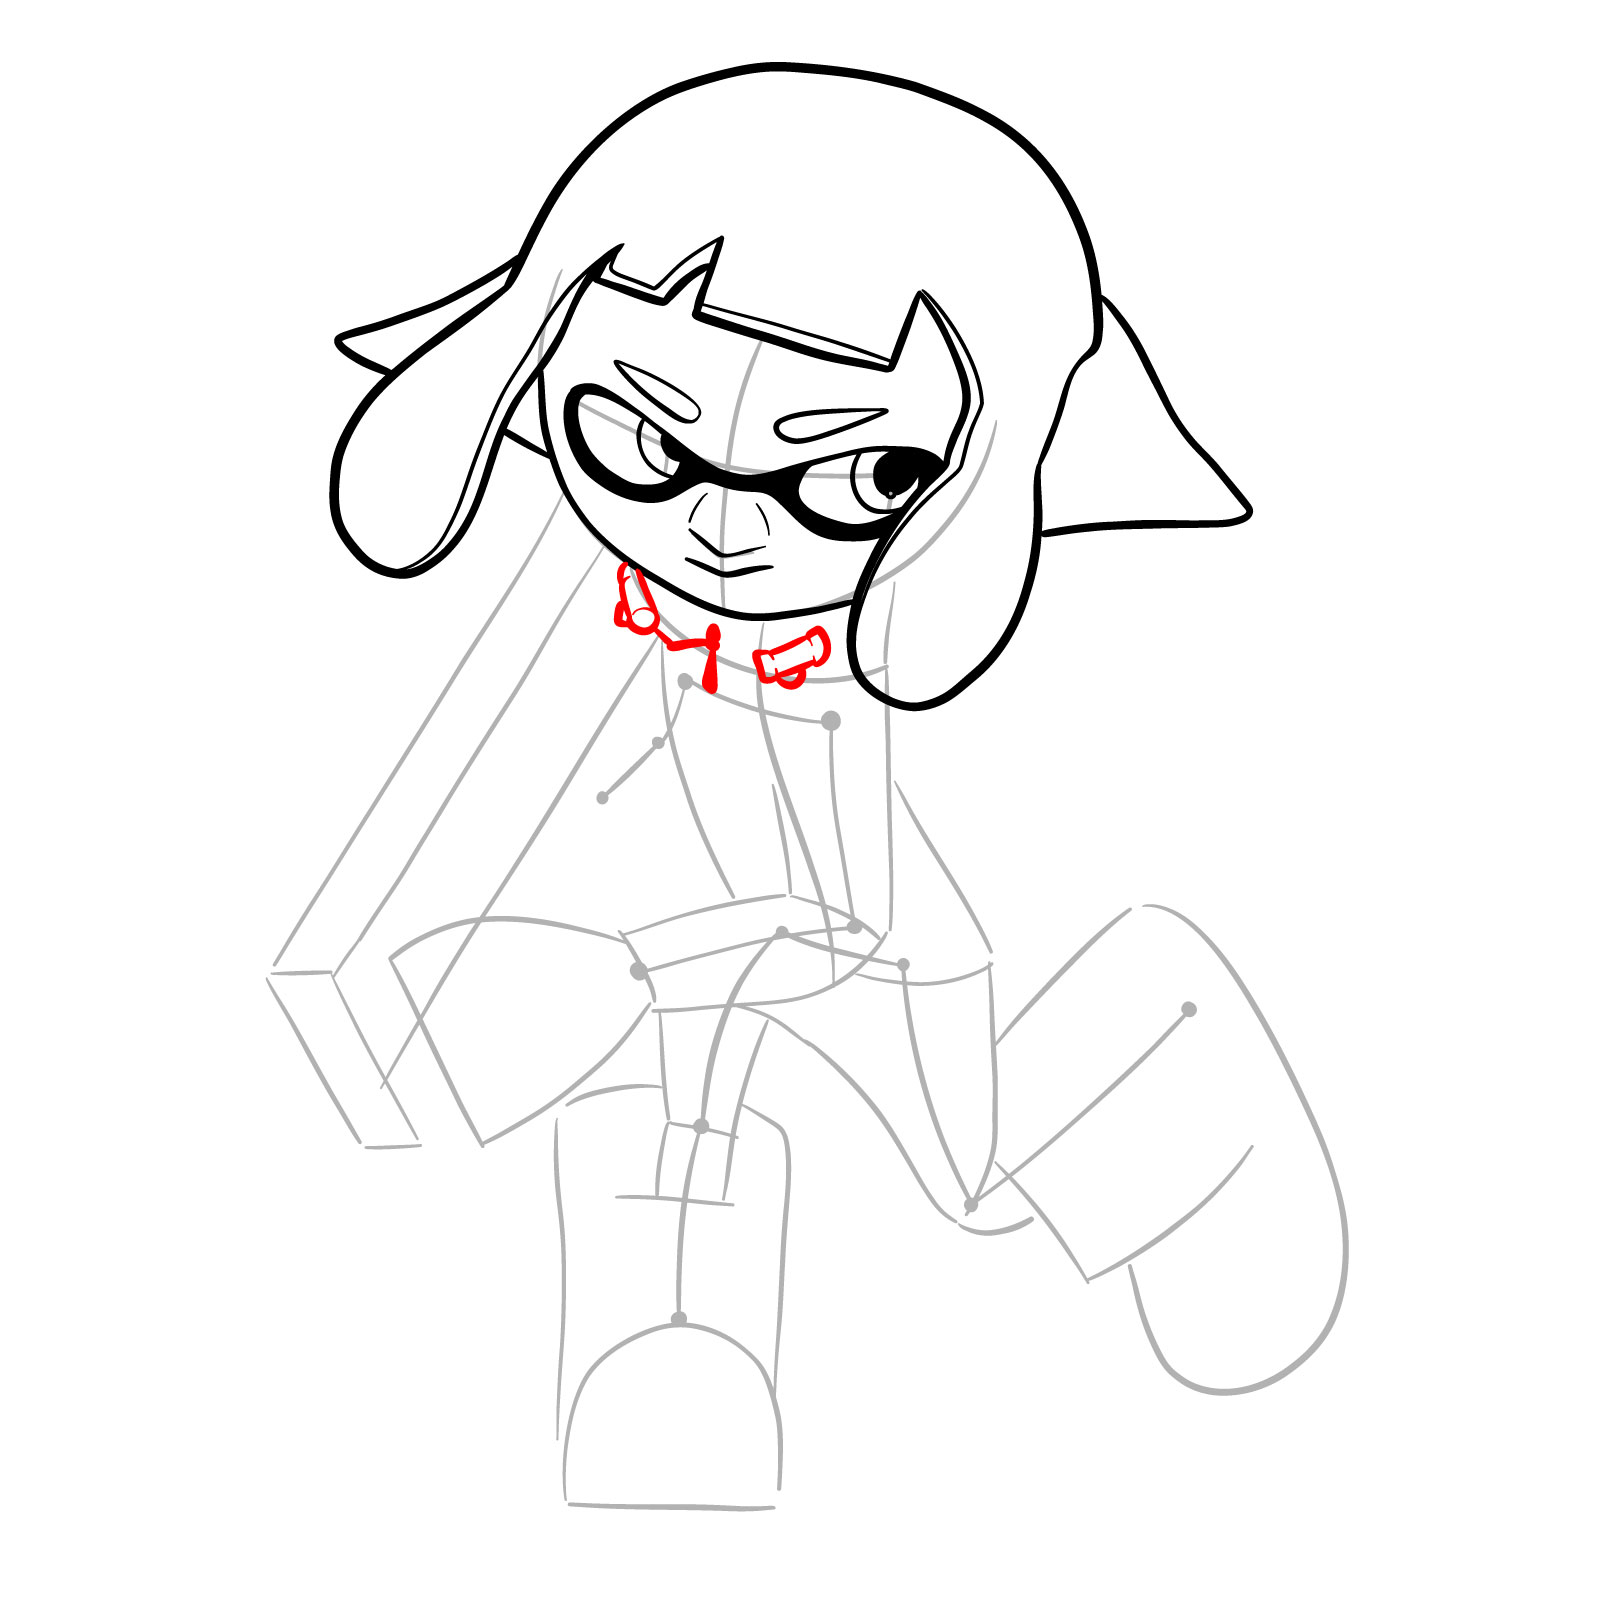 How to draw a Splatoon Agent 4 - step 12